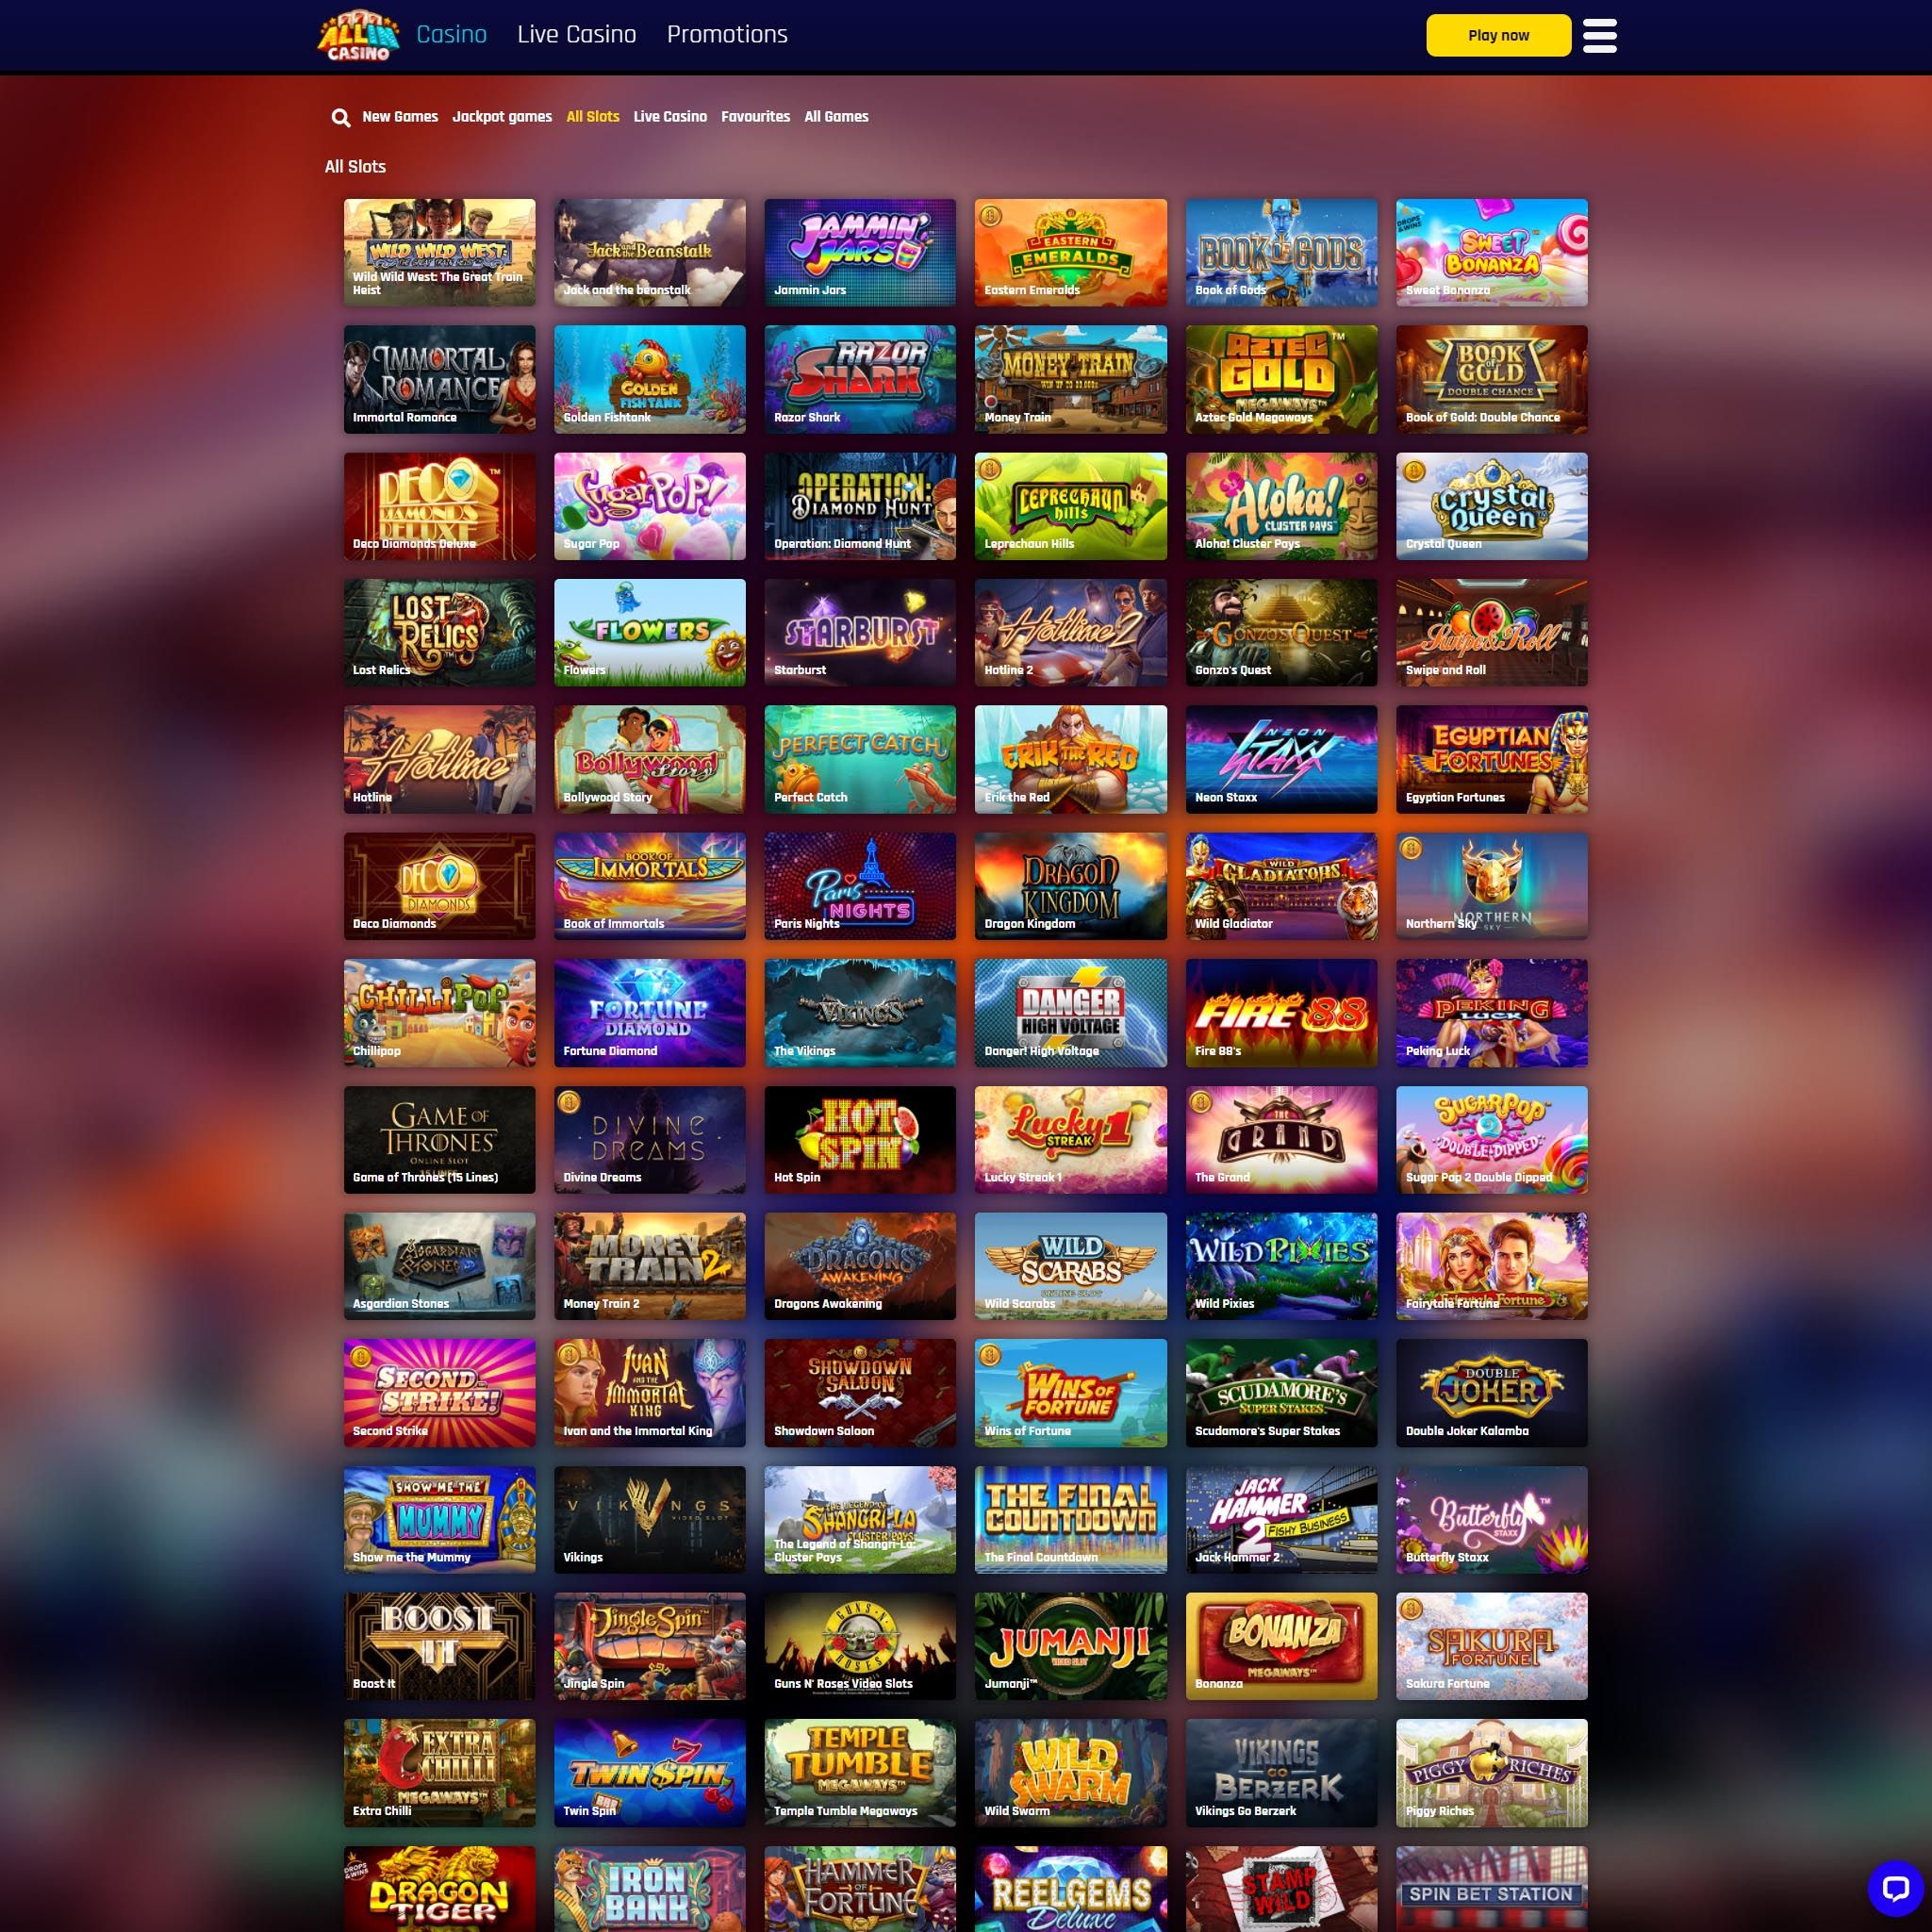 All In Casino full games catalogue